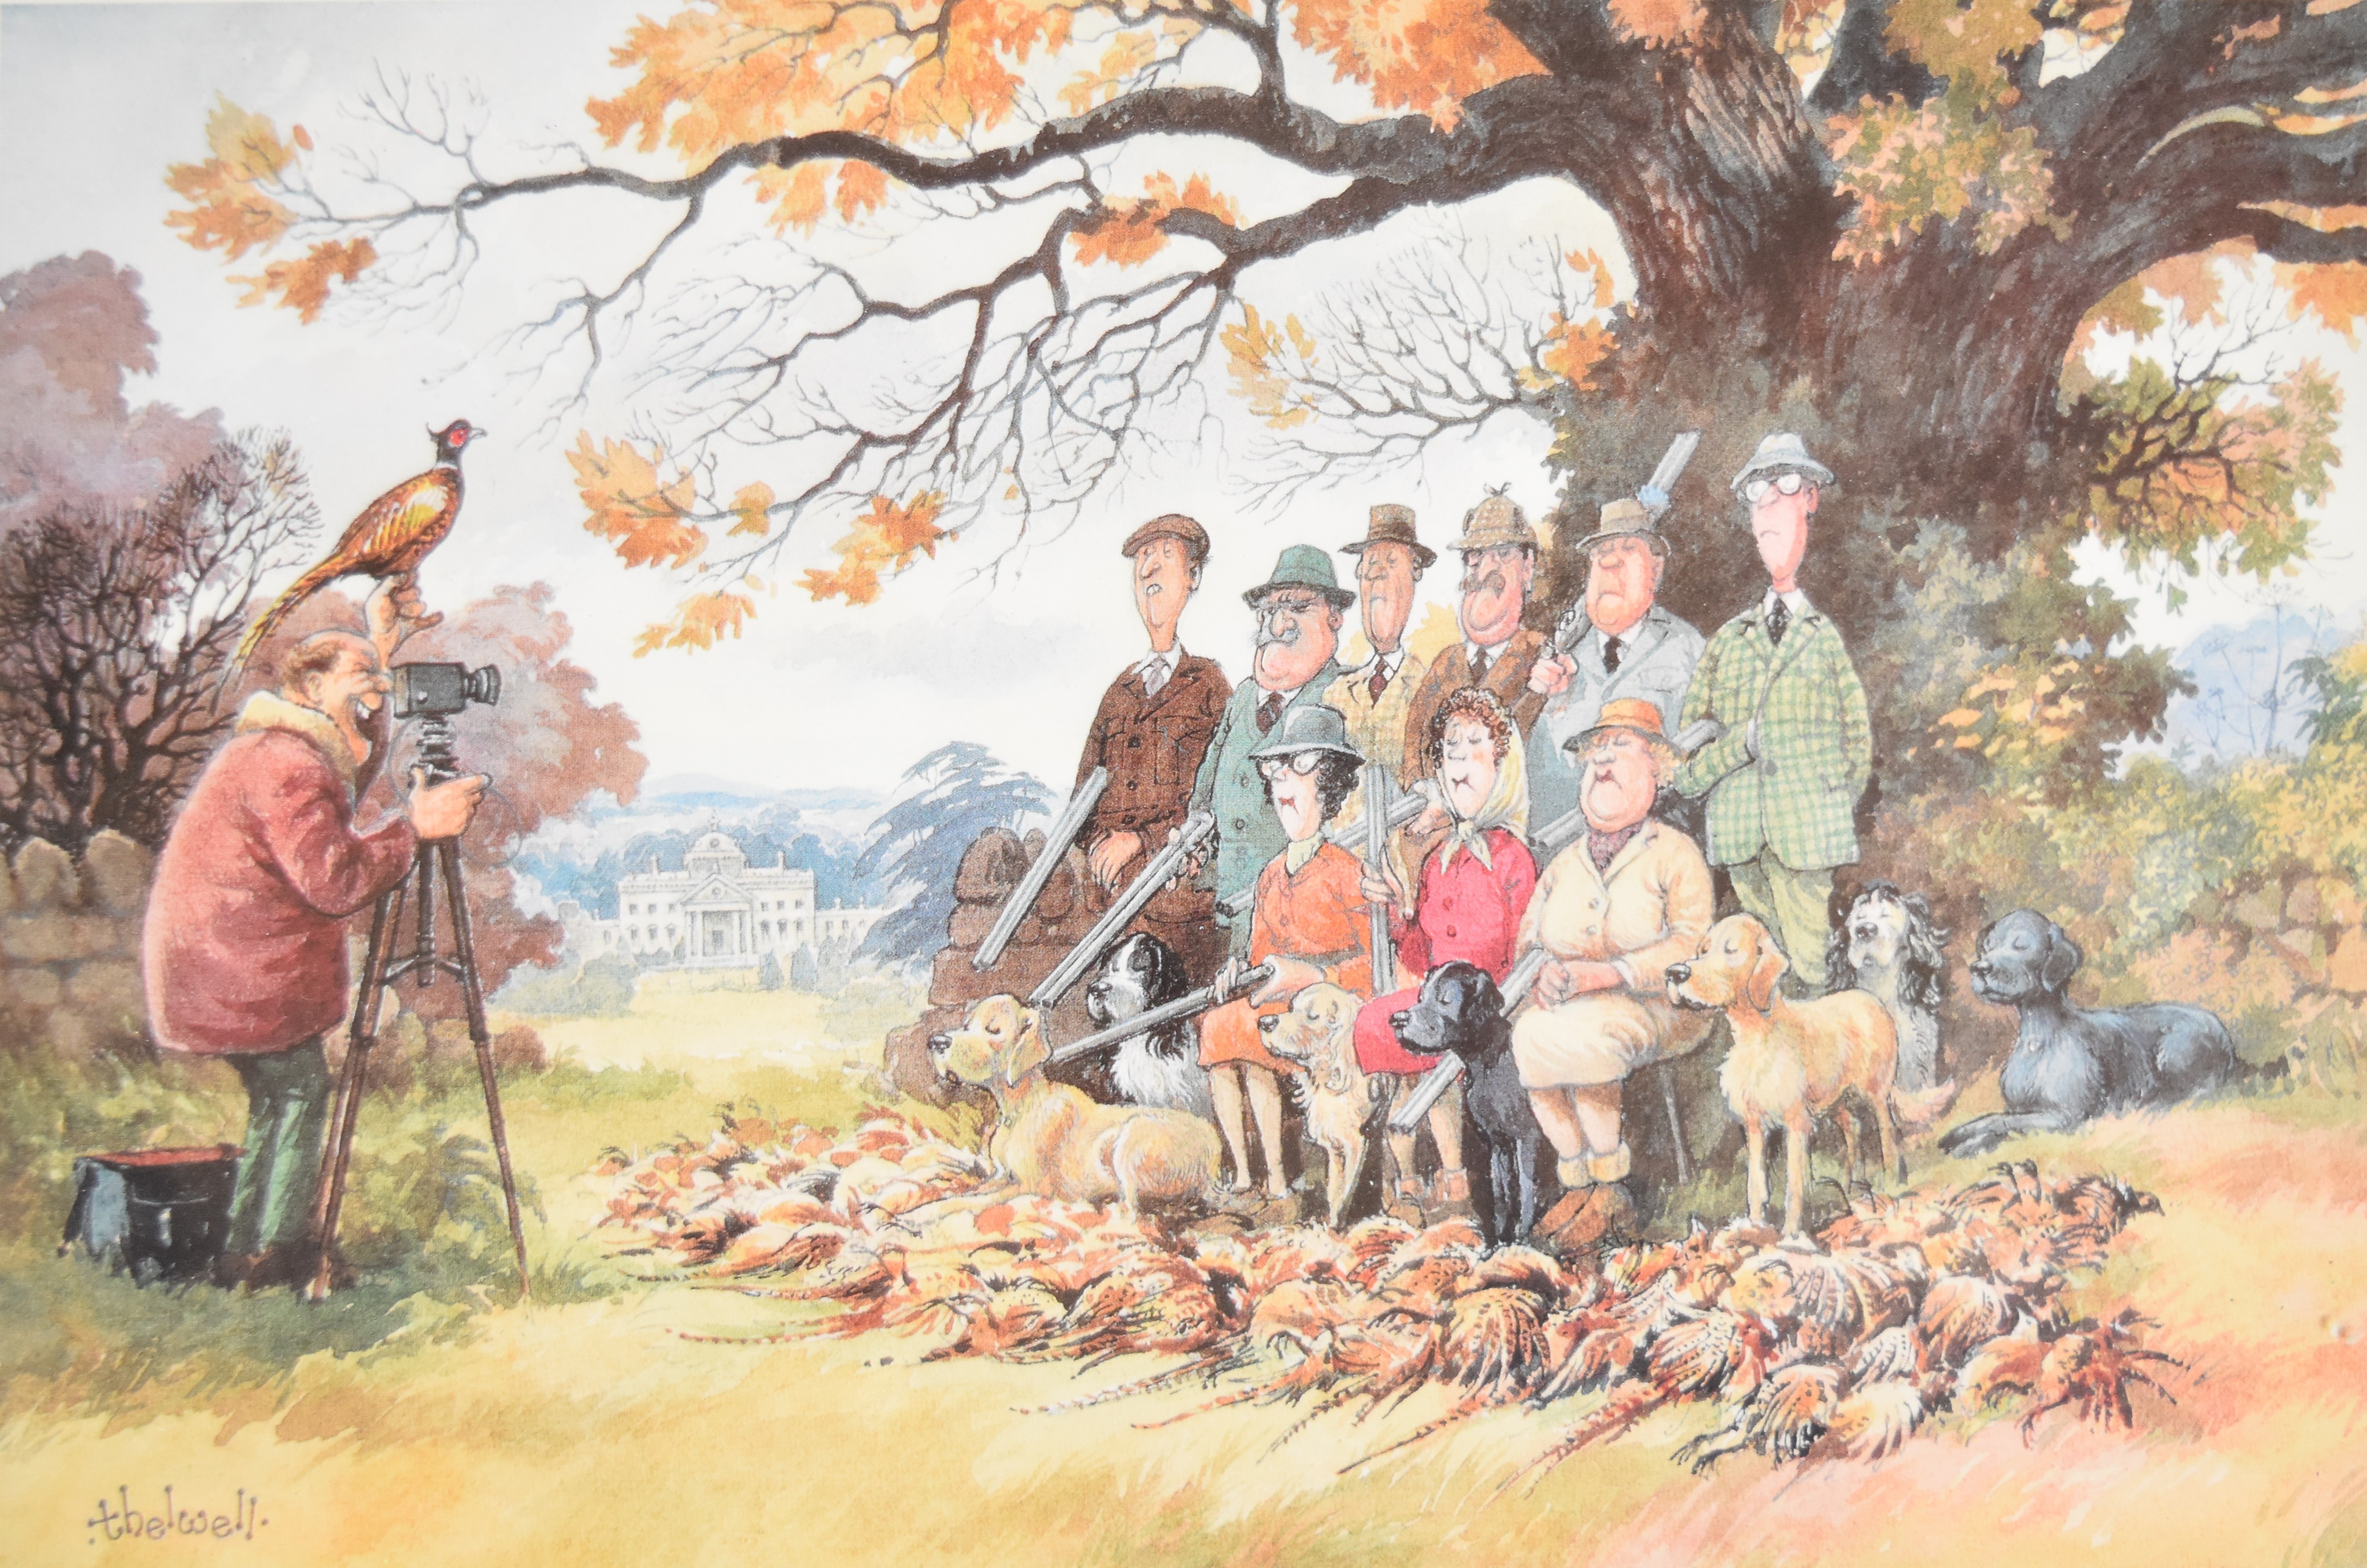 Two Norman Thelwell signed limited edition of 850 prints 'The Smooth Shoot' and 'The Royal Shoot', - Image 2 of 10